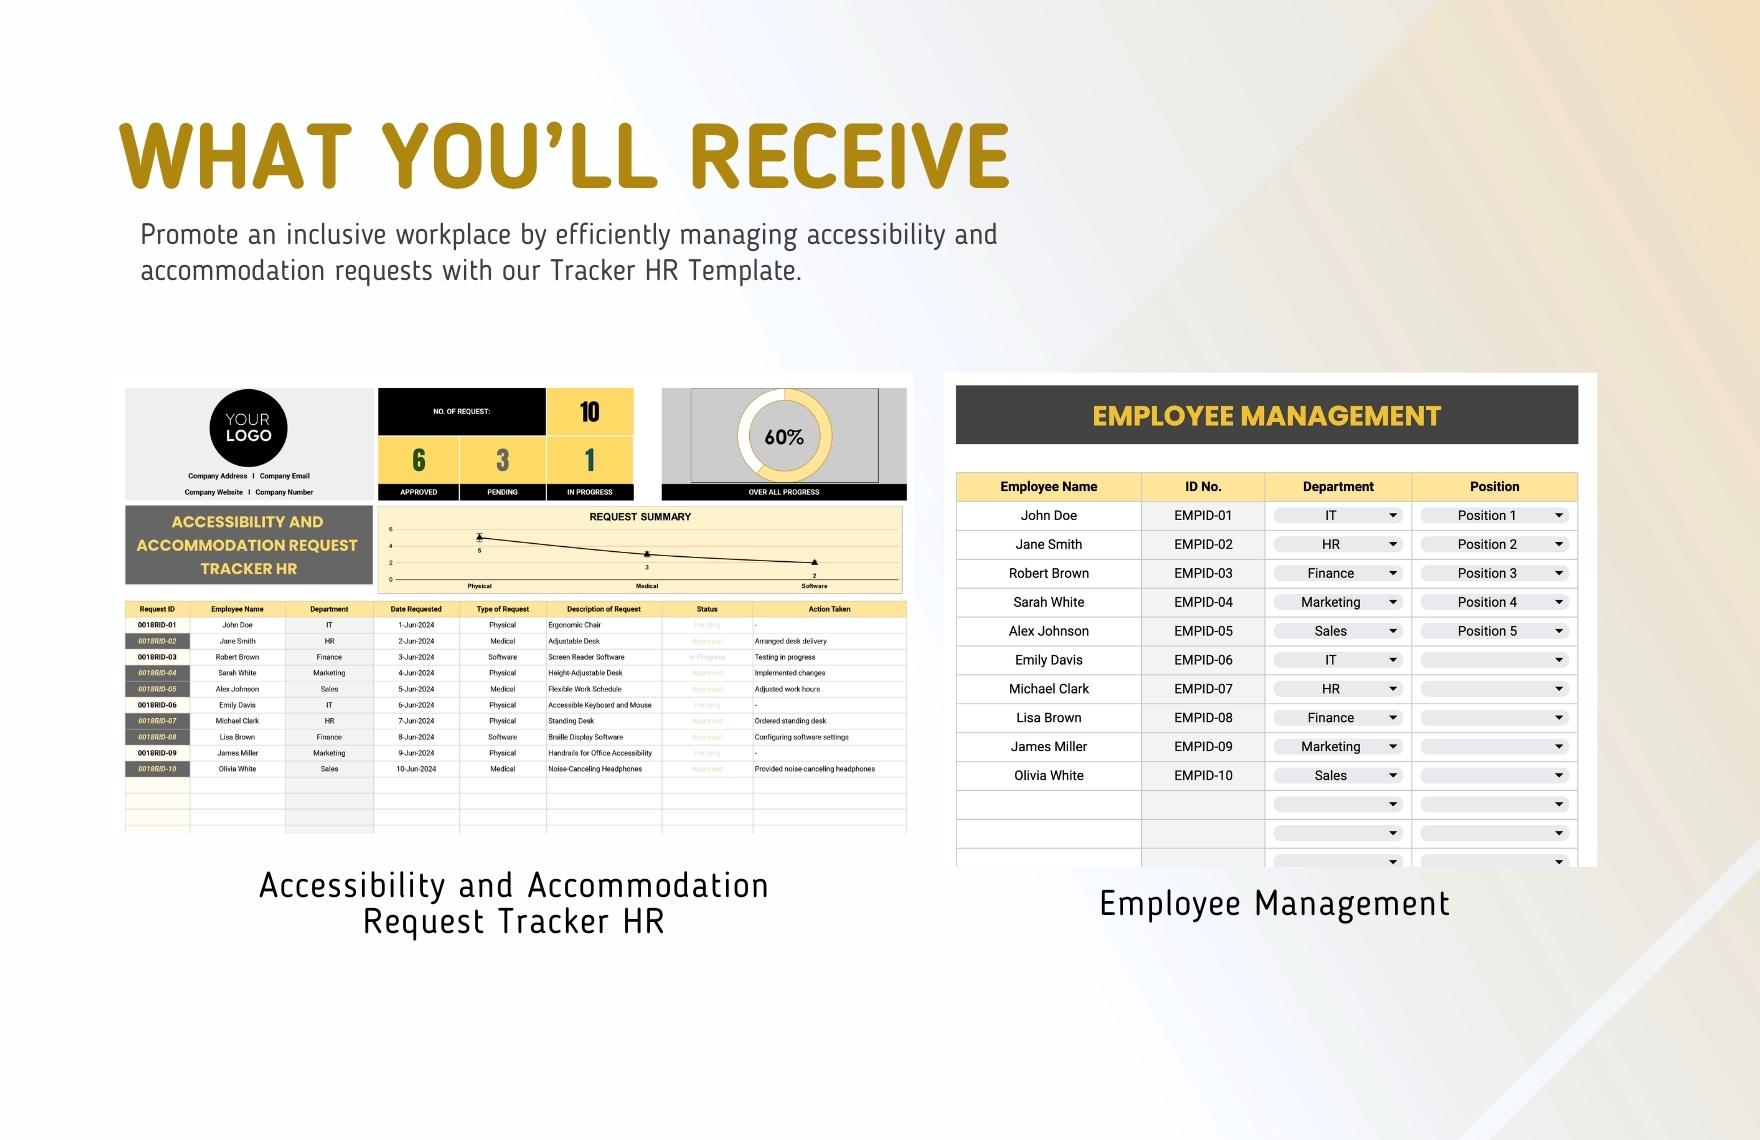 Accessibility and Accommodation Request Tracker HR Template